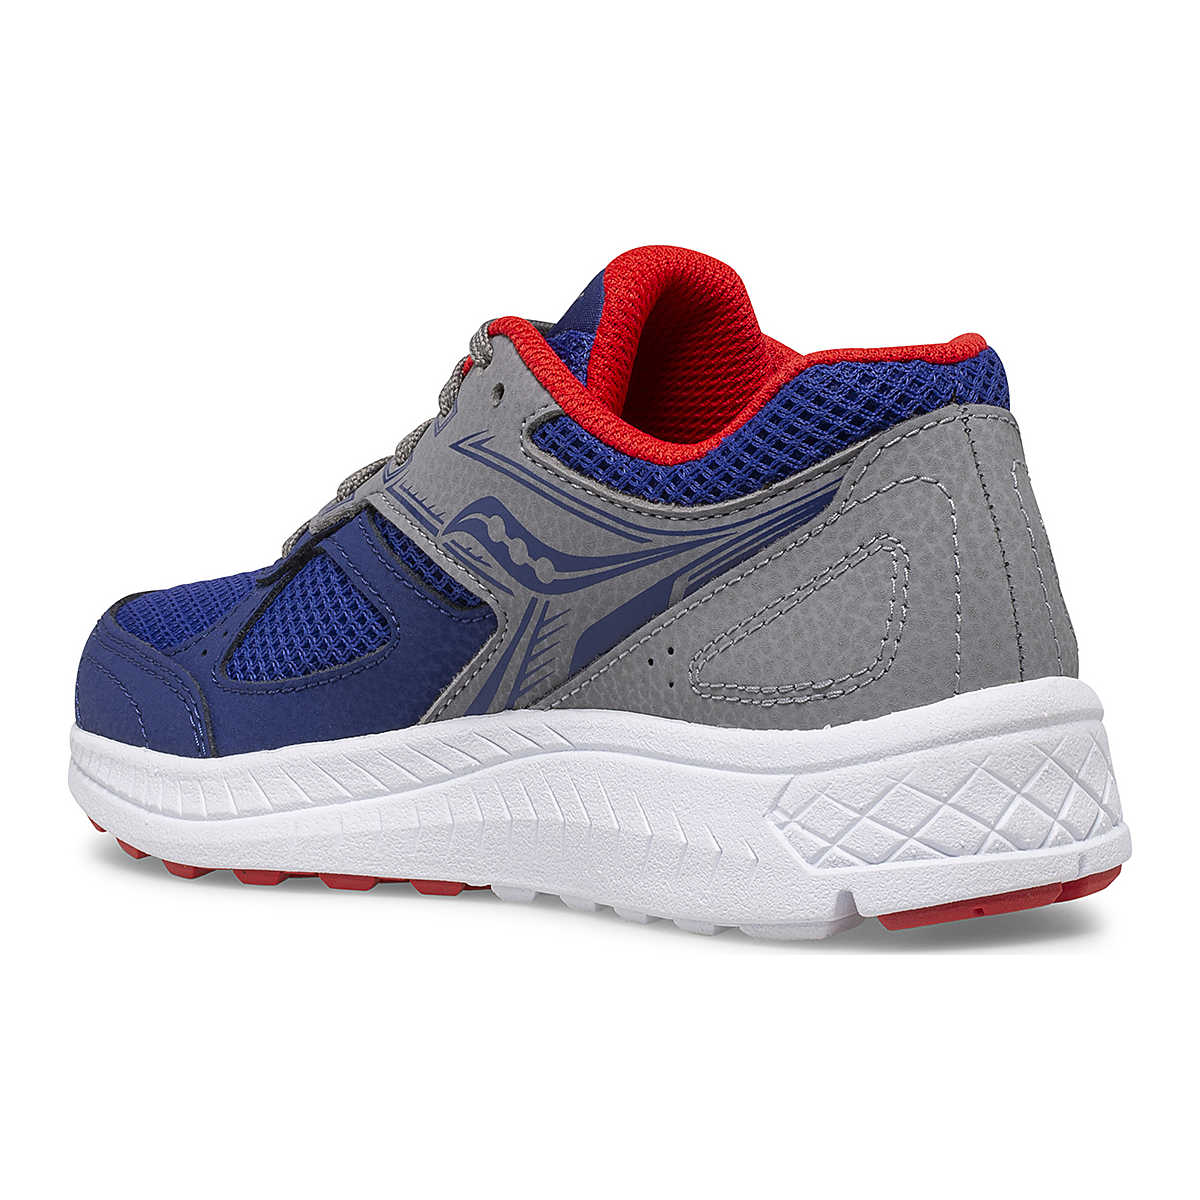 Saucony Cohesion 14 (Little Kid/Big Kid) *** Wides Available***